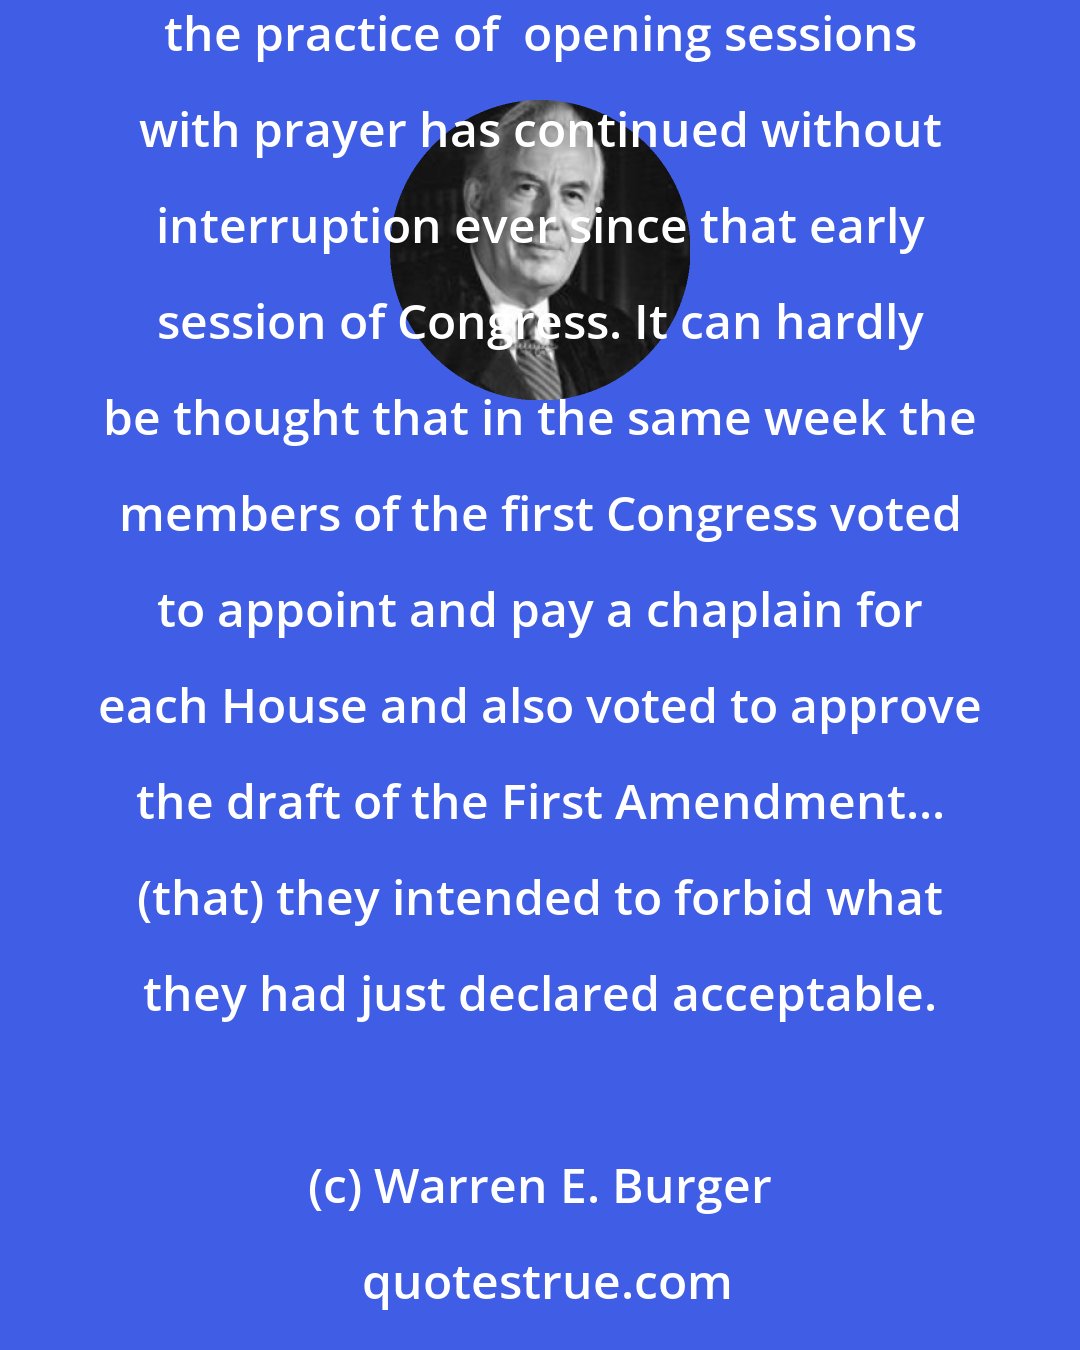 Warren E. Burger: The men who wrote the First Amendment religion clause did not view paid legislative chaplains and opening prayers as a violation of that amendment... the practice of  opening sessions with prayer has continued without interruption ever since that early session of Congress. It can hardly be thought that in the same week the members of the first Congress voted to appoint and pay a chaplain for each House and also voted to approve the draft of the First Amendment... (that) they intended to forbid what they had just declared acceptable.